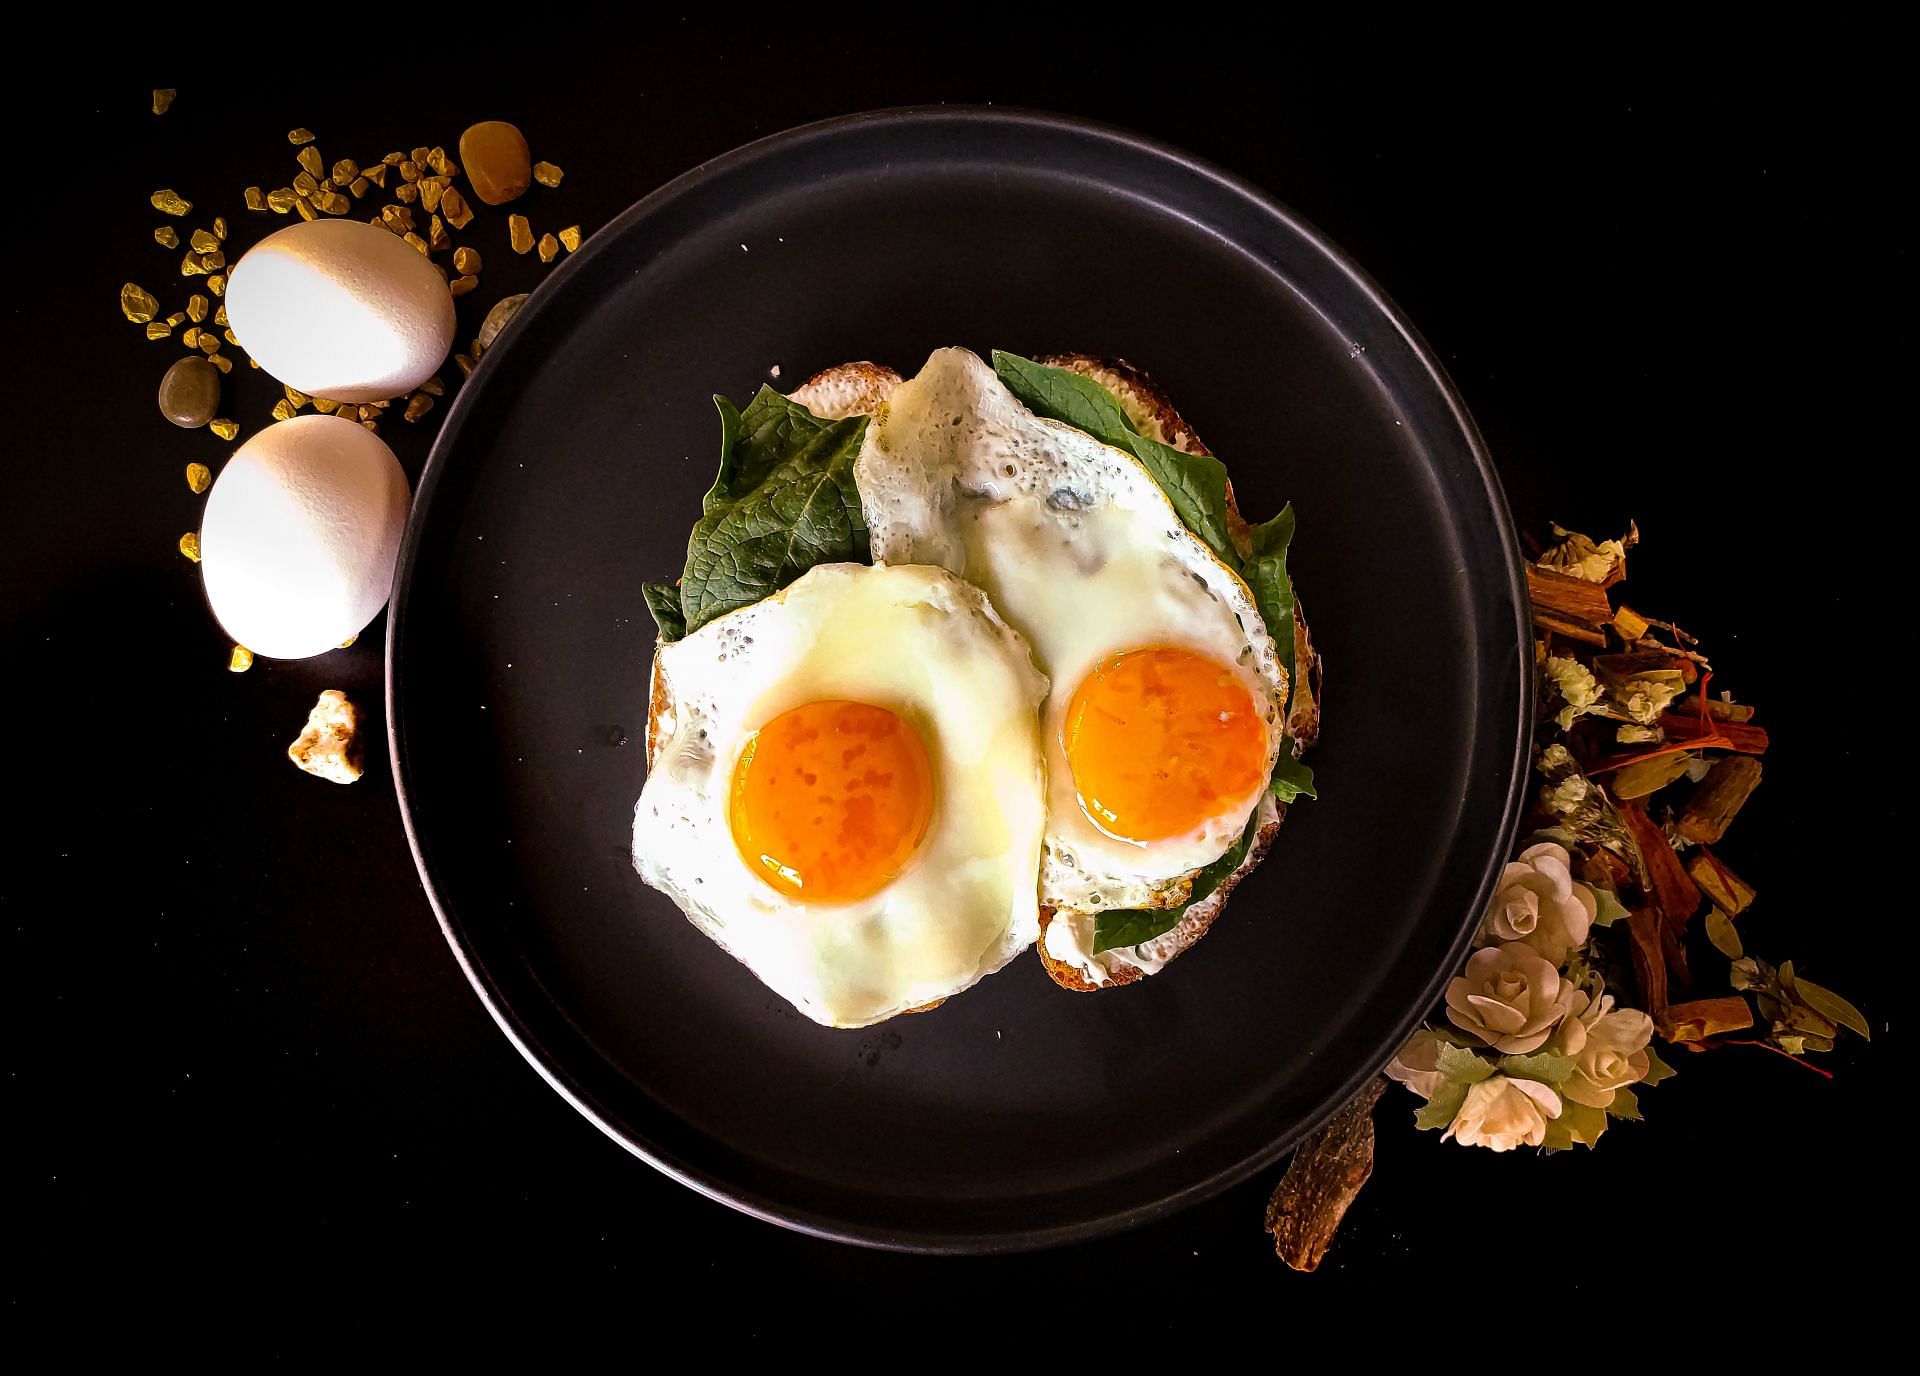 Eggs are rich in highly bioavailable K2 MK-7. (Image via Unsplash/Coffeefy Workkafe)